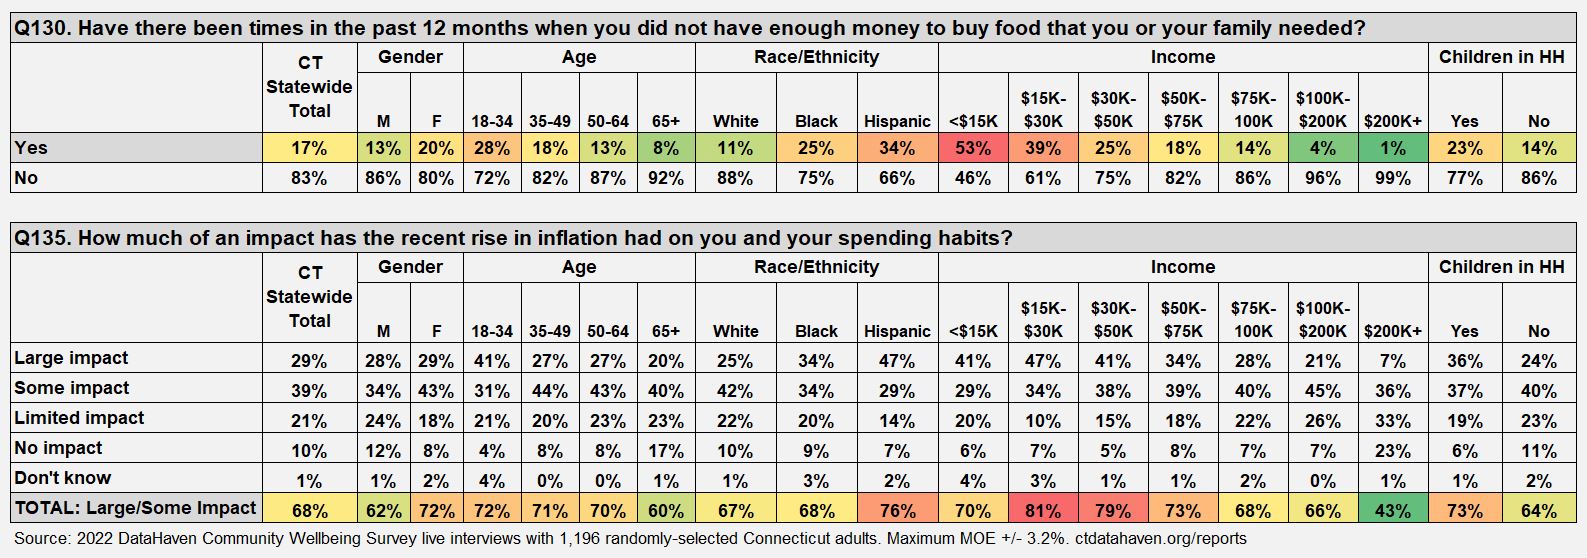 2022 DataHaven Community Wellbeing Survey data table excerpt with food insecurity and inflation data